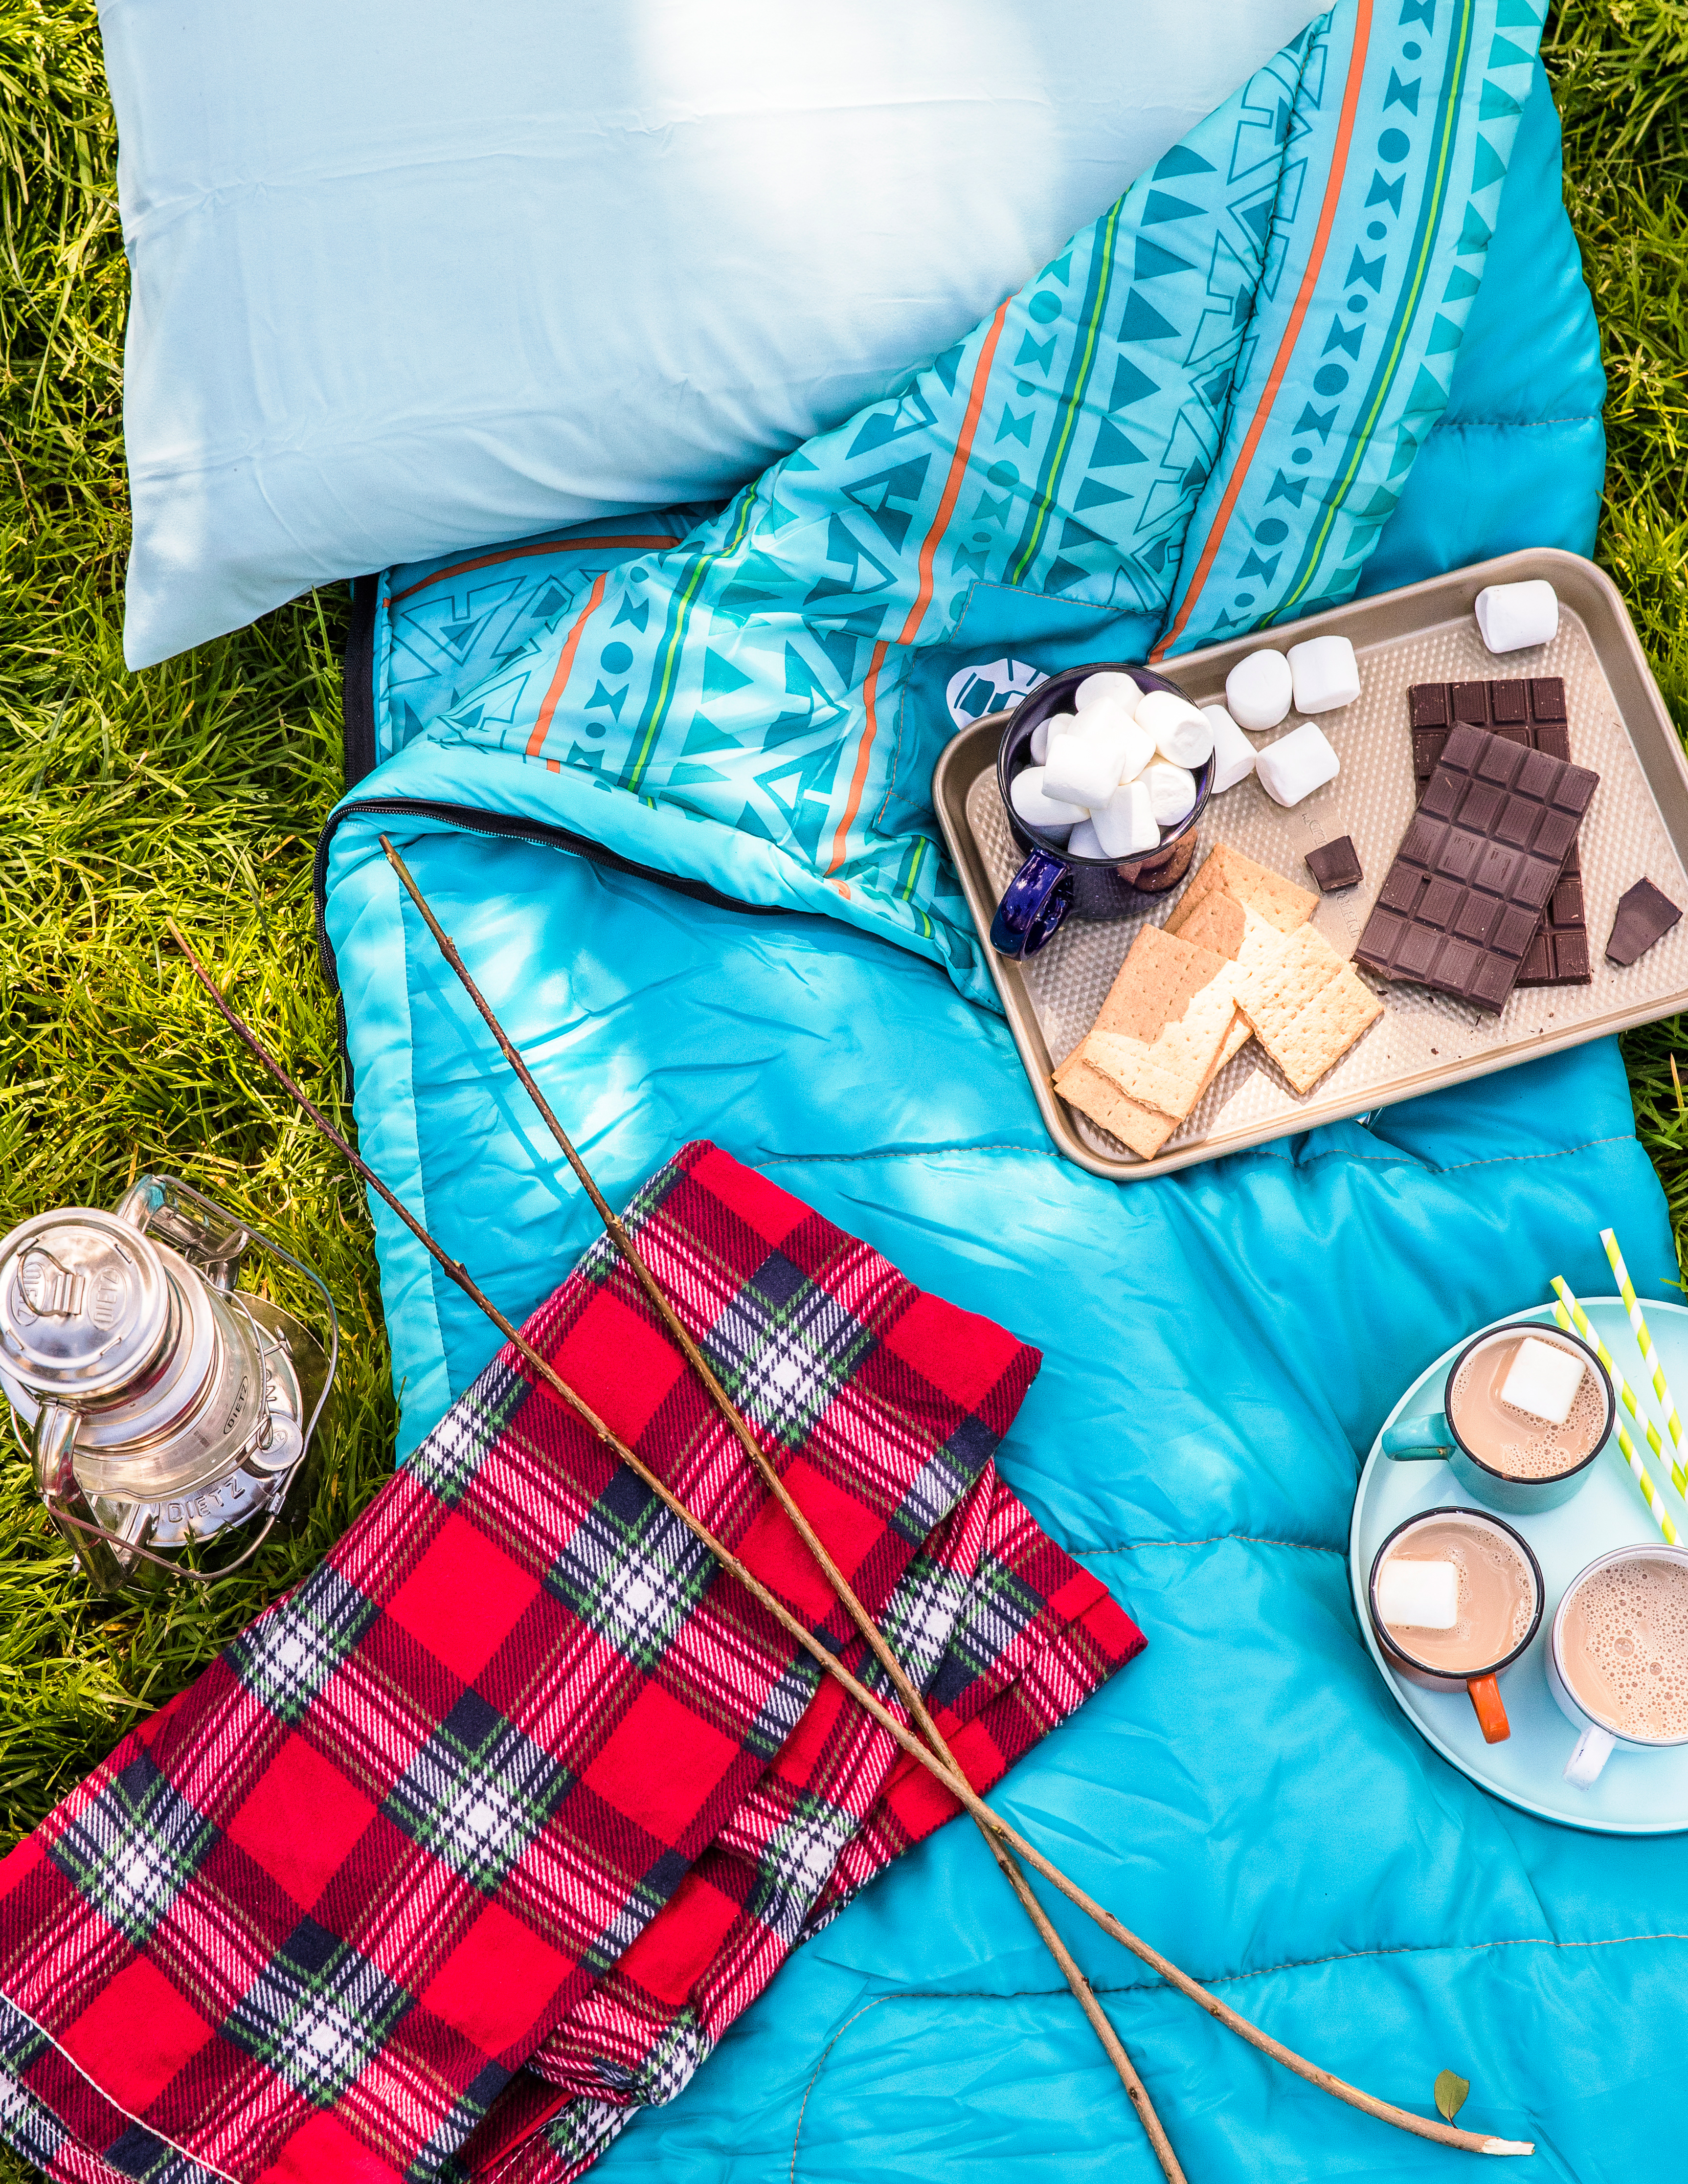 How to Stage a Backyard Campout